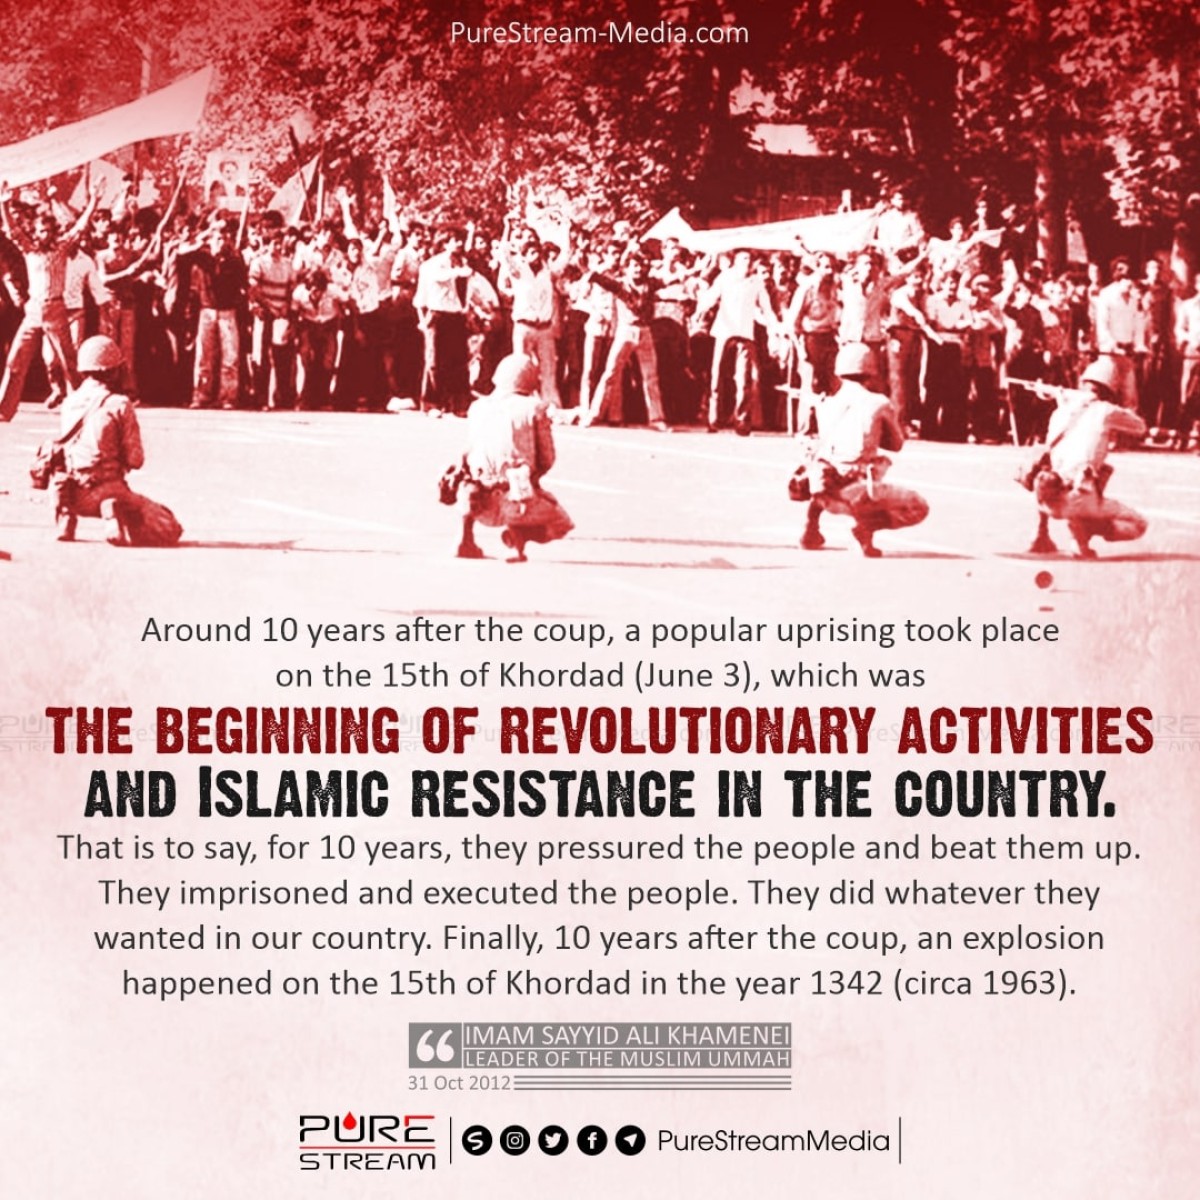 the beginning of revolutionary activities and Islamic resistance in the country